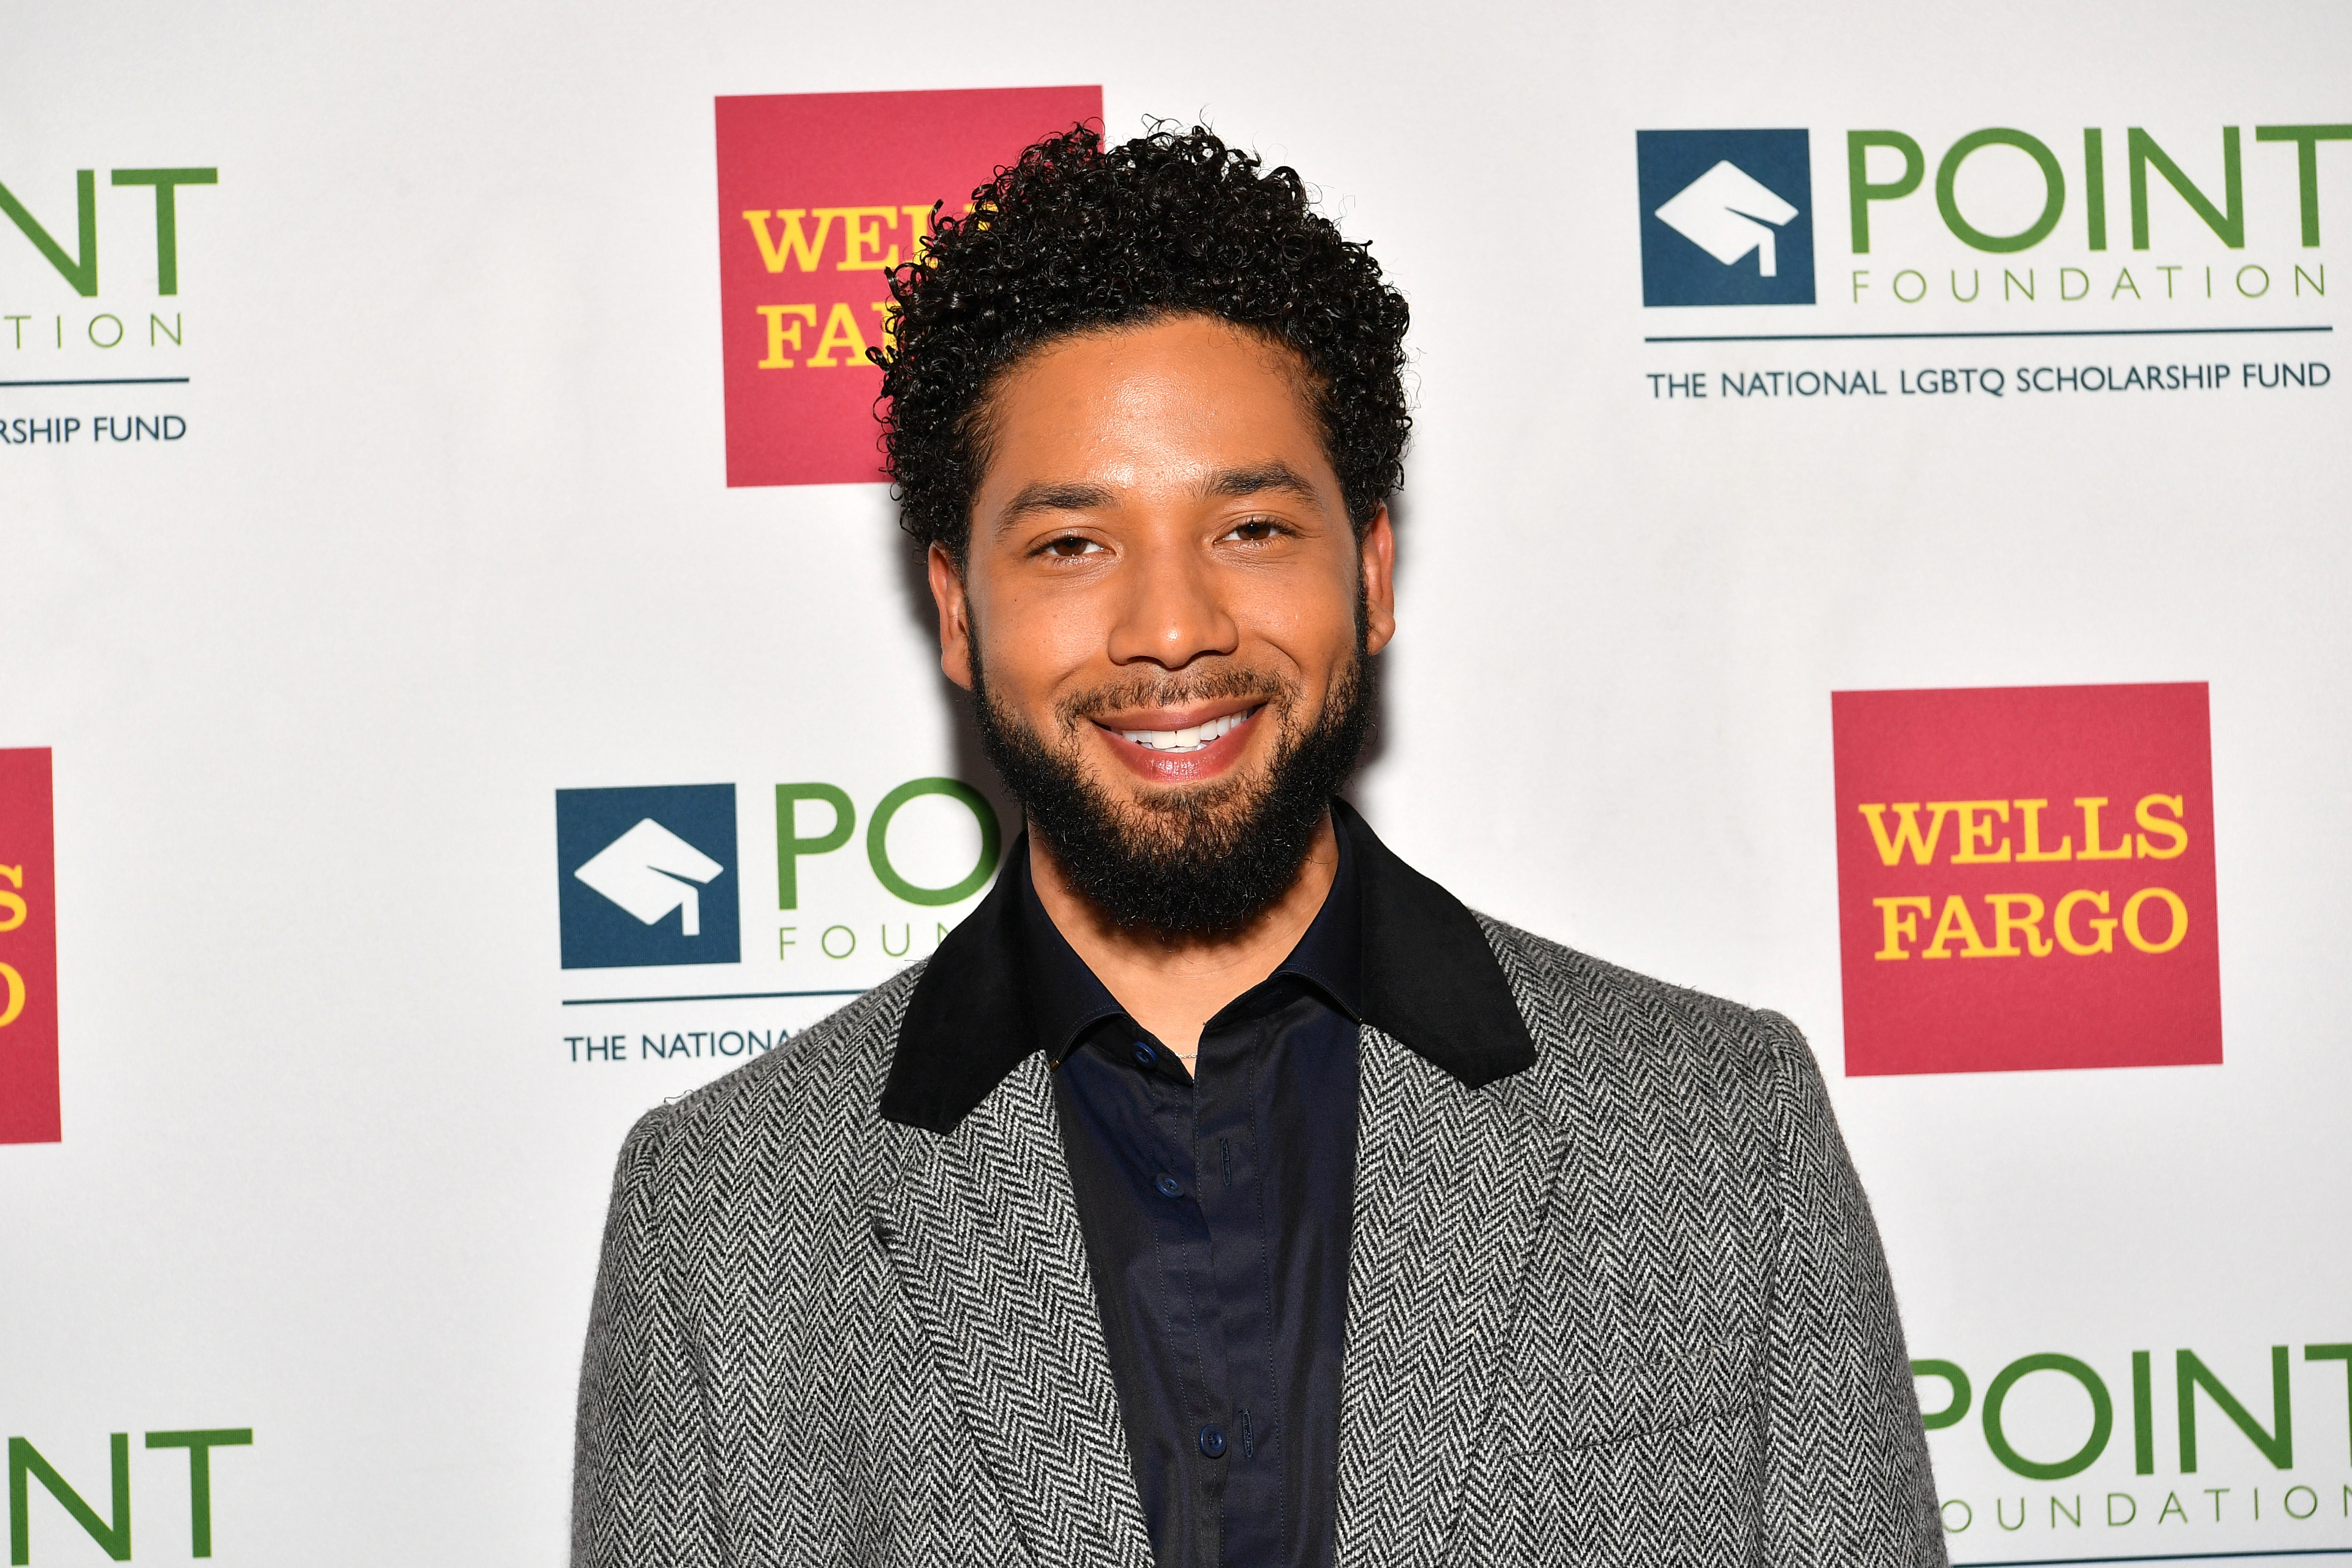 Jussie Smollett’s Siblings Quote Malcolm X, Blame Media In Support Of Brother